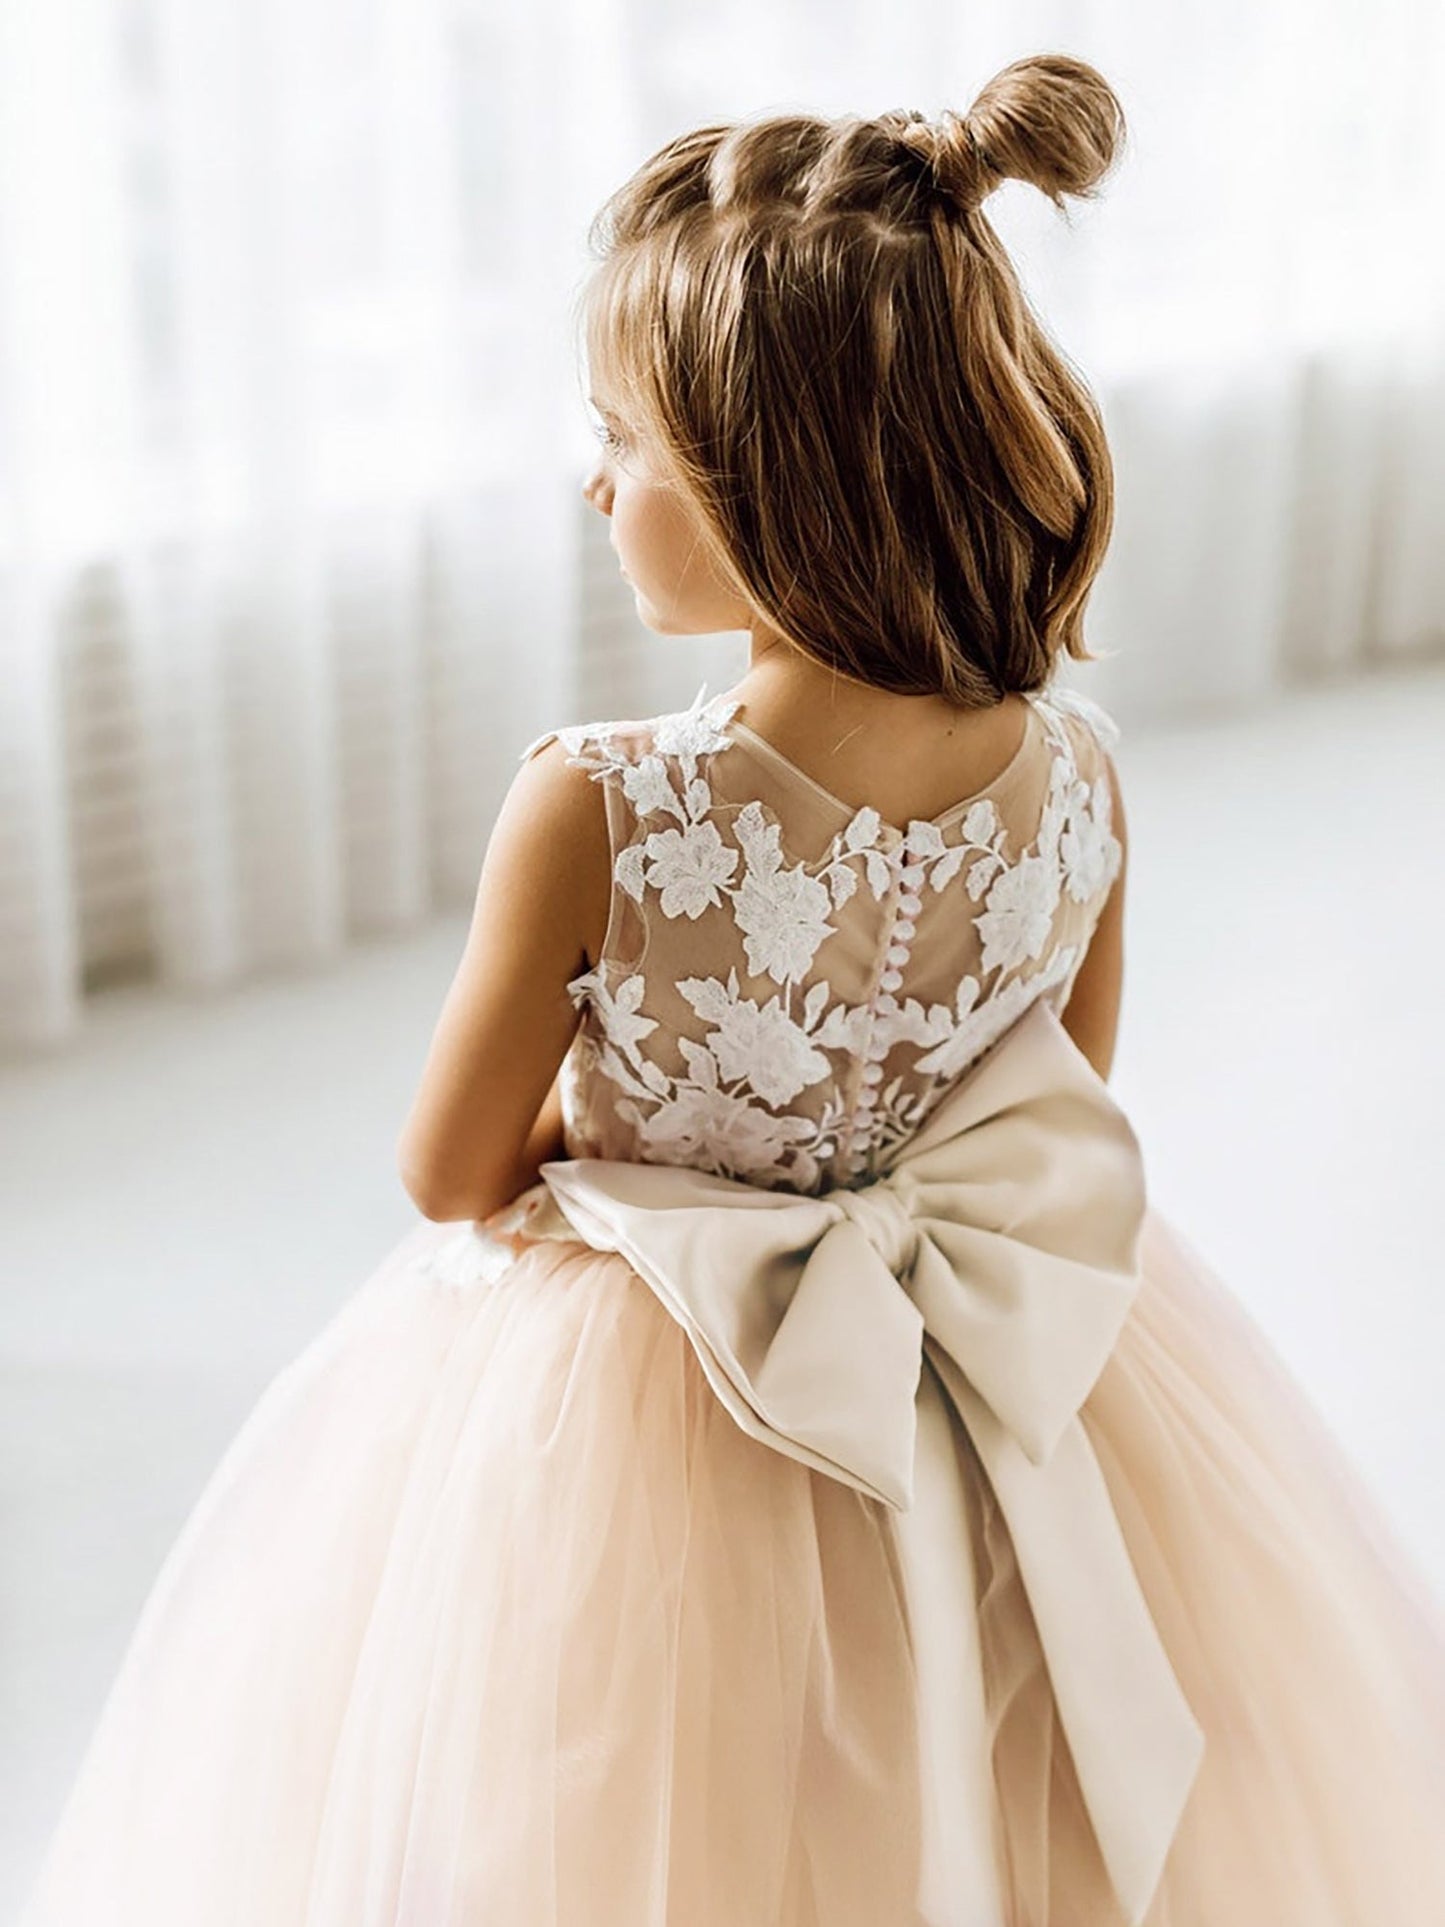 Long Ball Gown Tulle Lace Sleeveless Flower Girl Dress with Bow-BIZTUNNEL